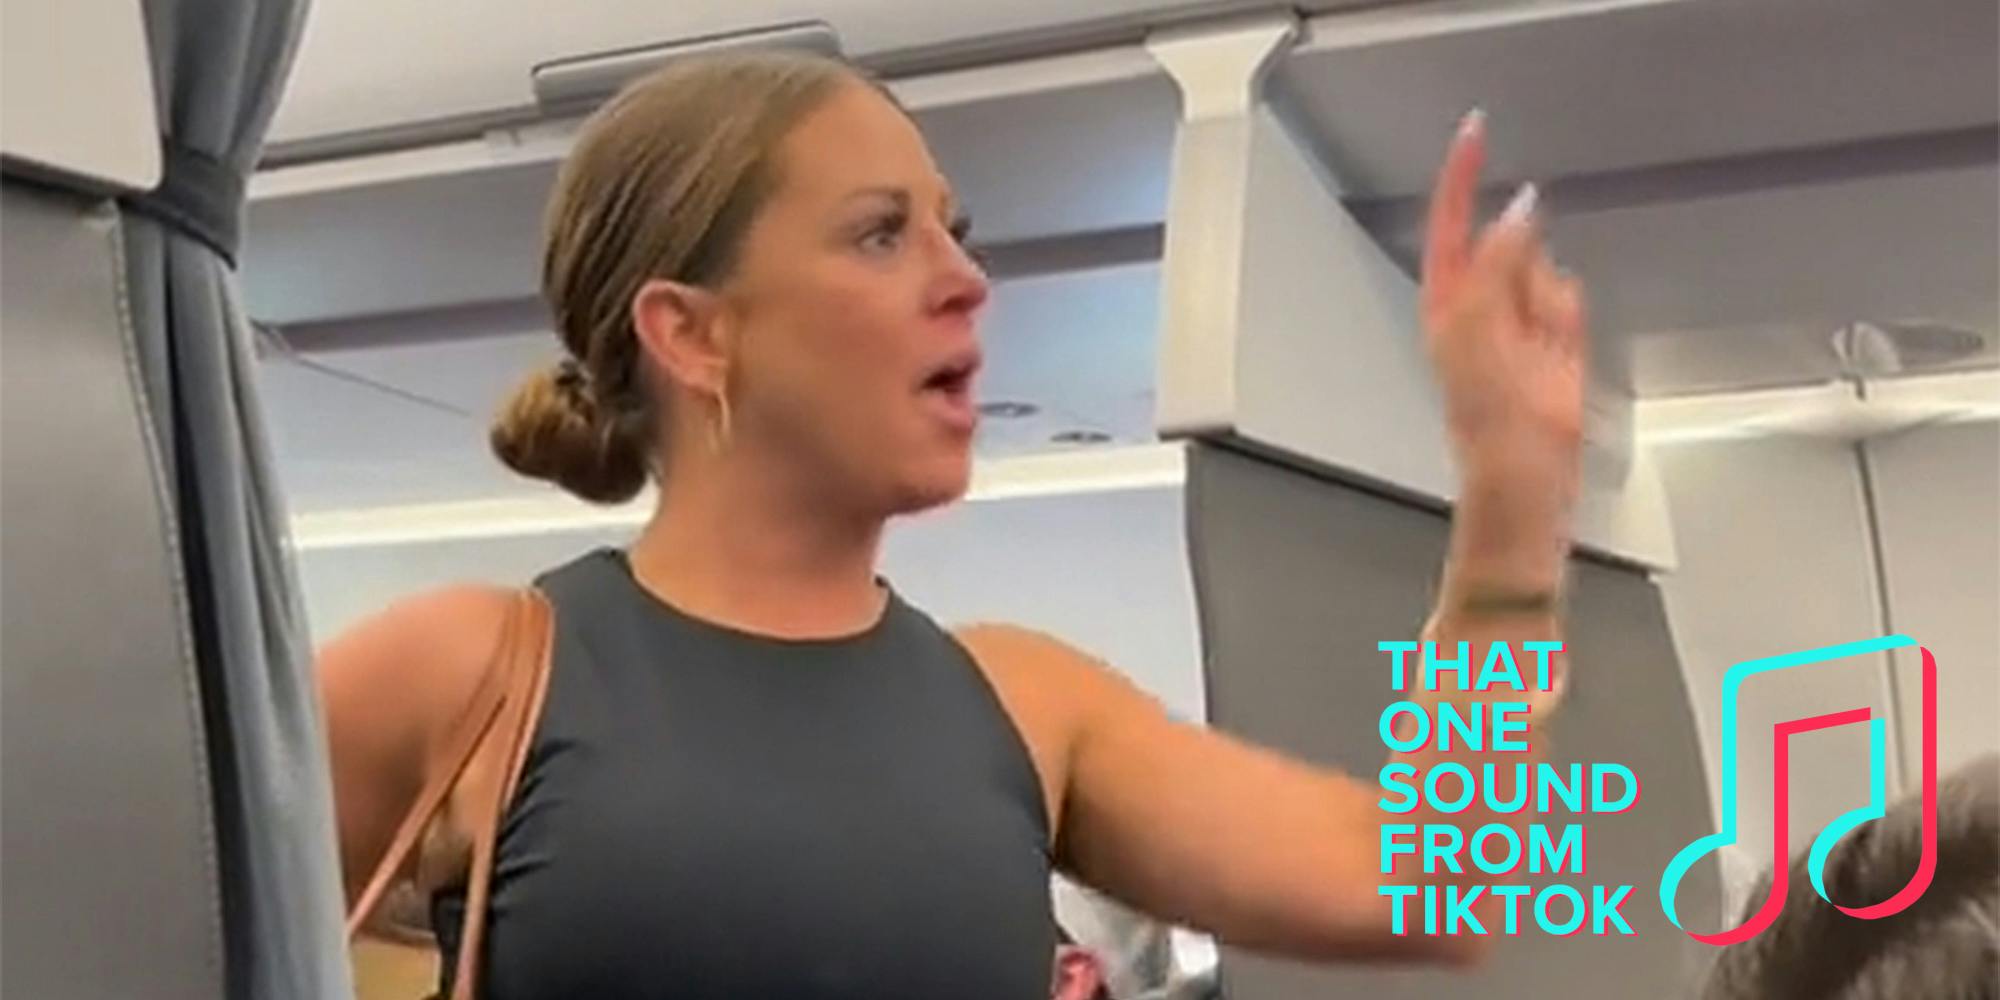 woman on airplane pointing with "that one sound from tiktok" logo